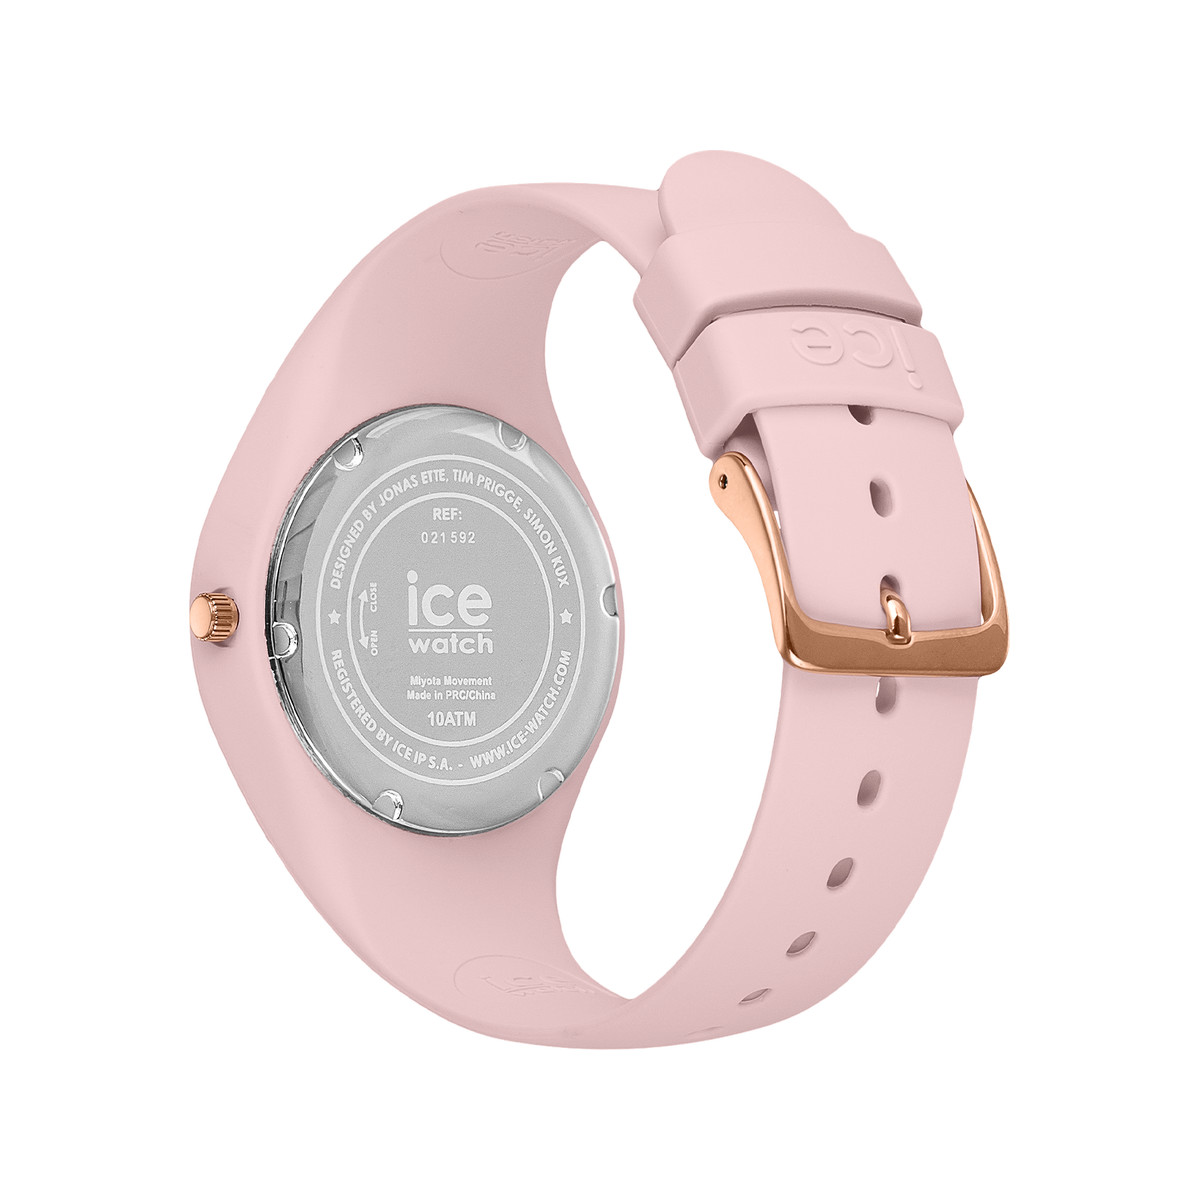 Montre ICE WATCH ice cosmos femme bracelet silicone rose - vue 3